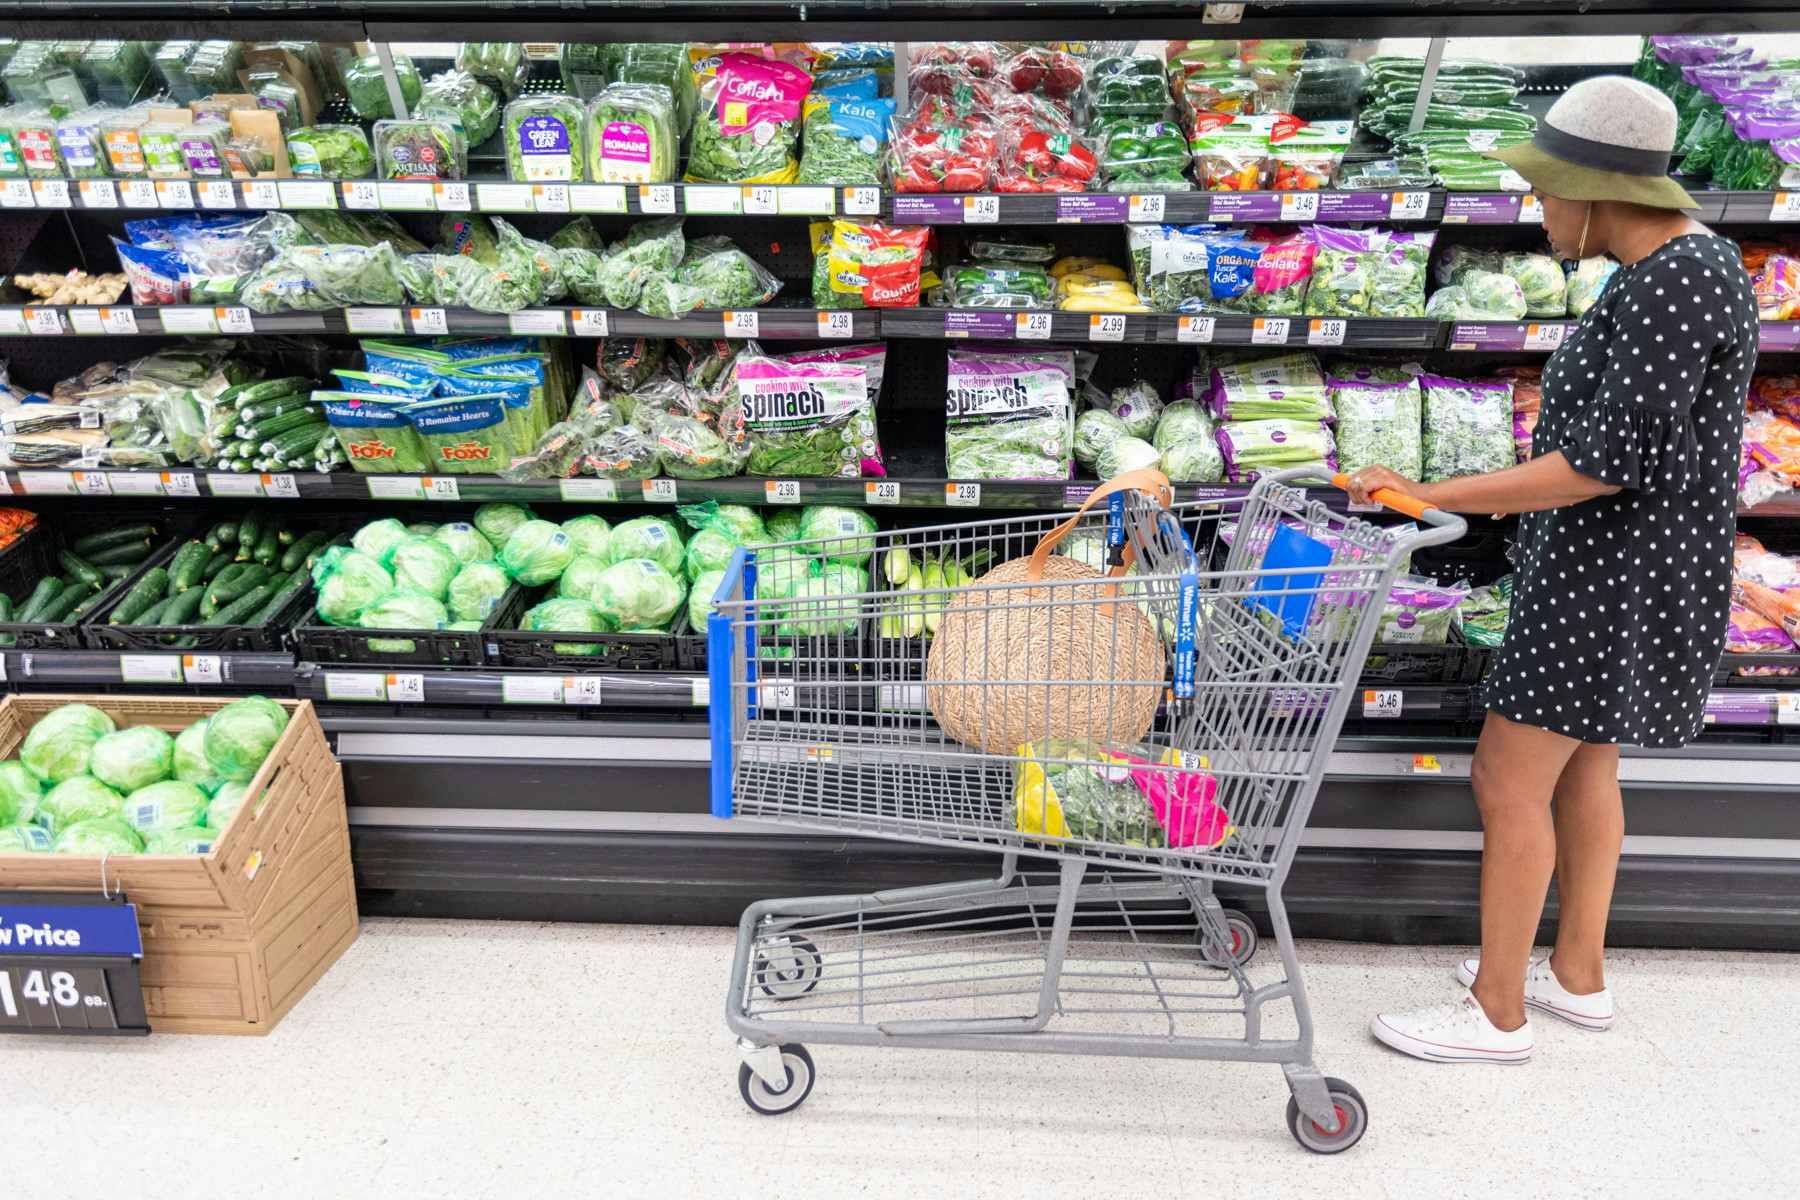 A person pushing a Walmart shopping cart and looking at the produce on the shelves.